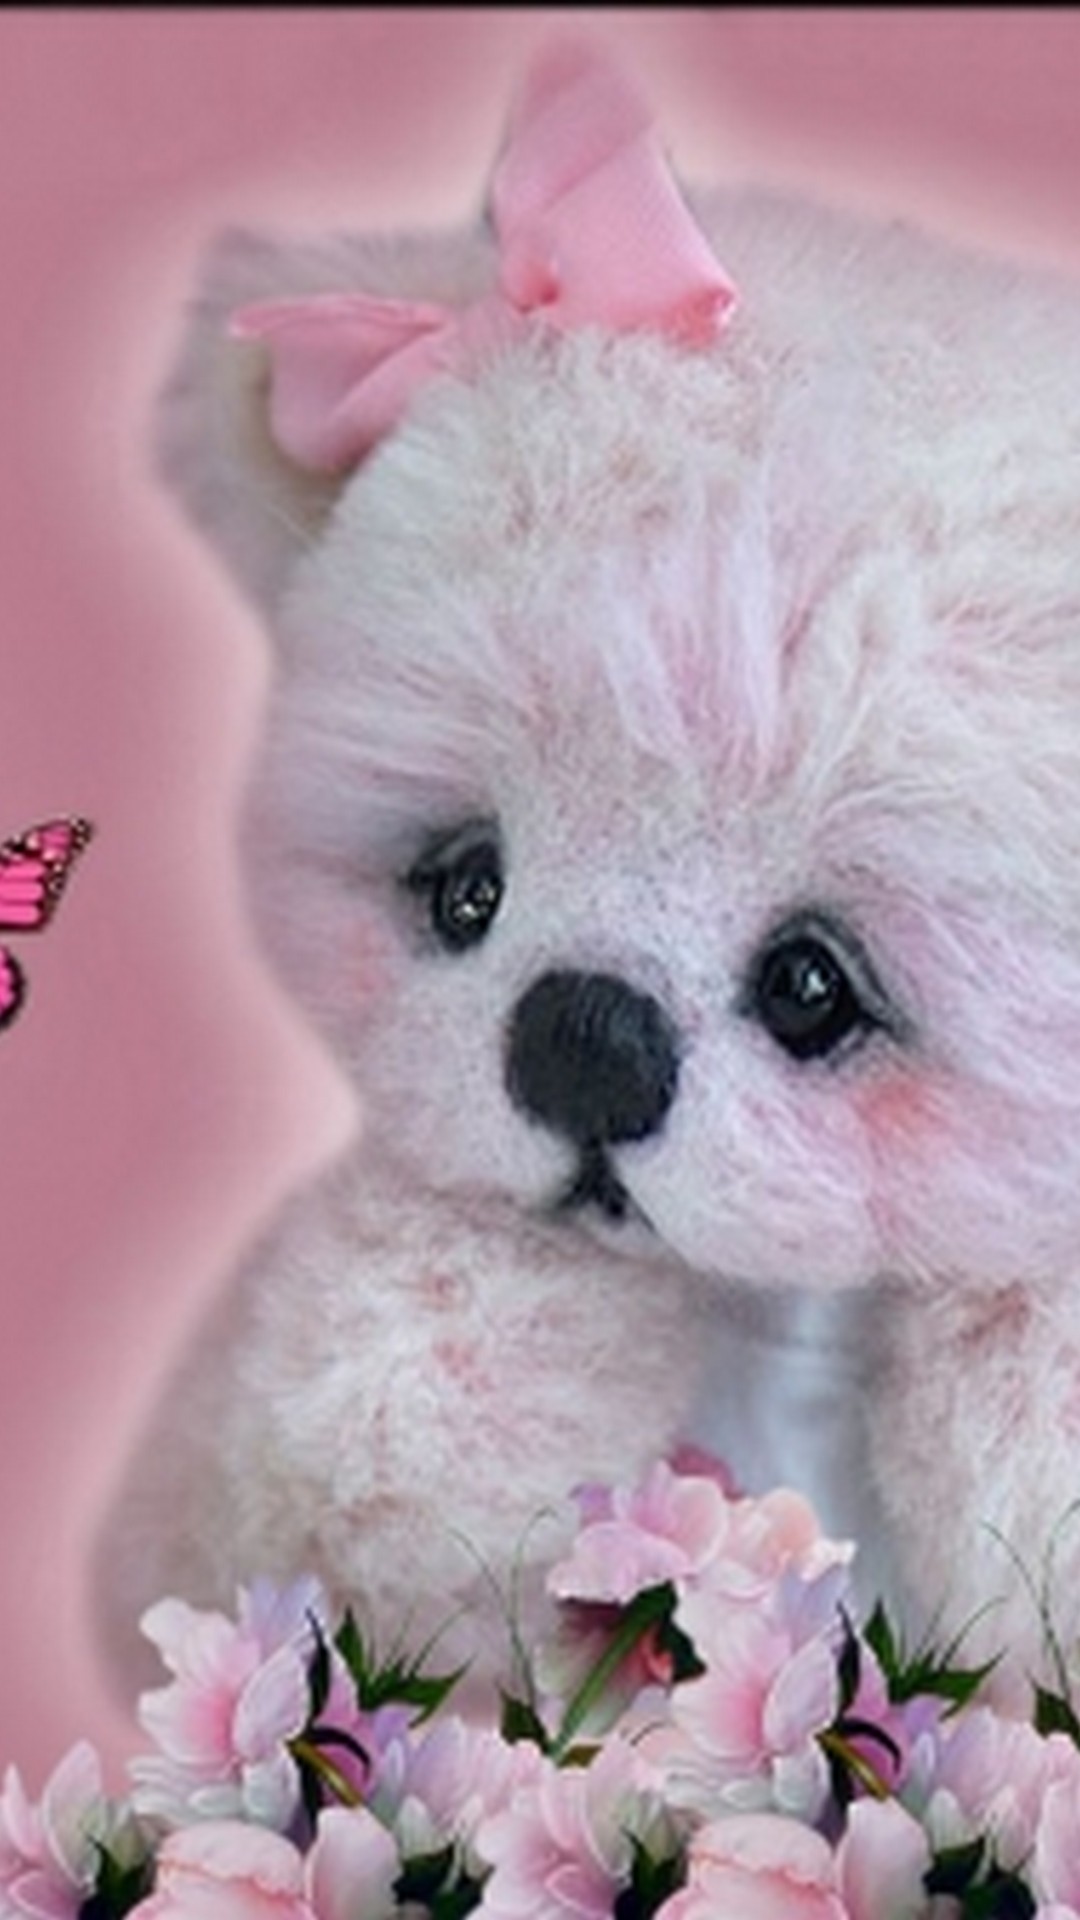 Wallpaper Cute Teddy Bear Android - 2021 Android Wallpapers